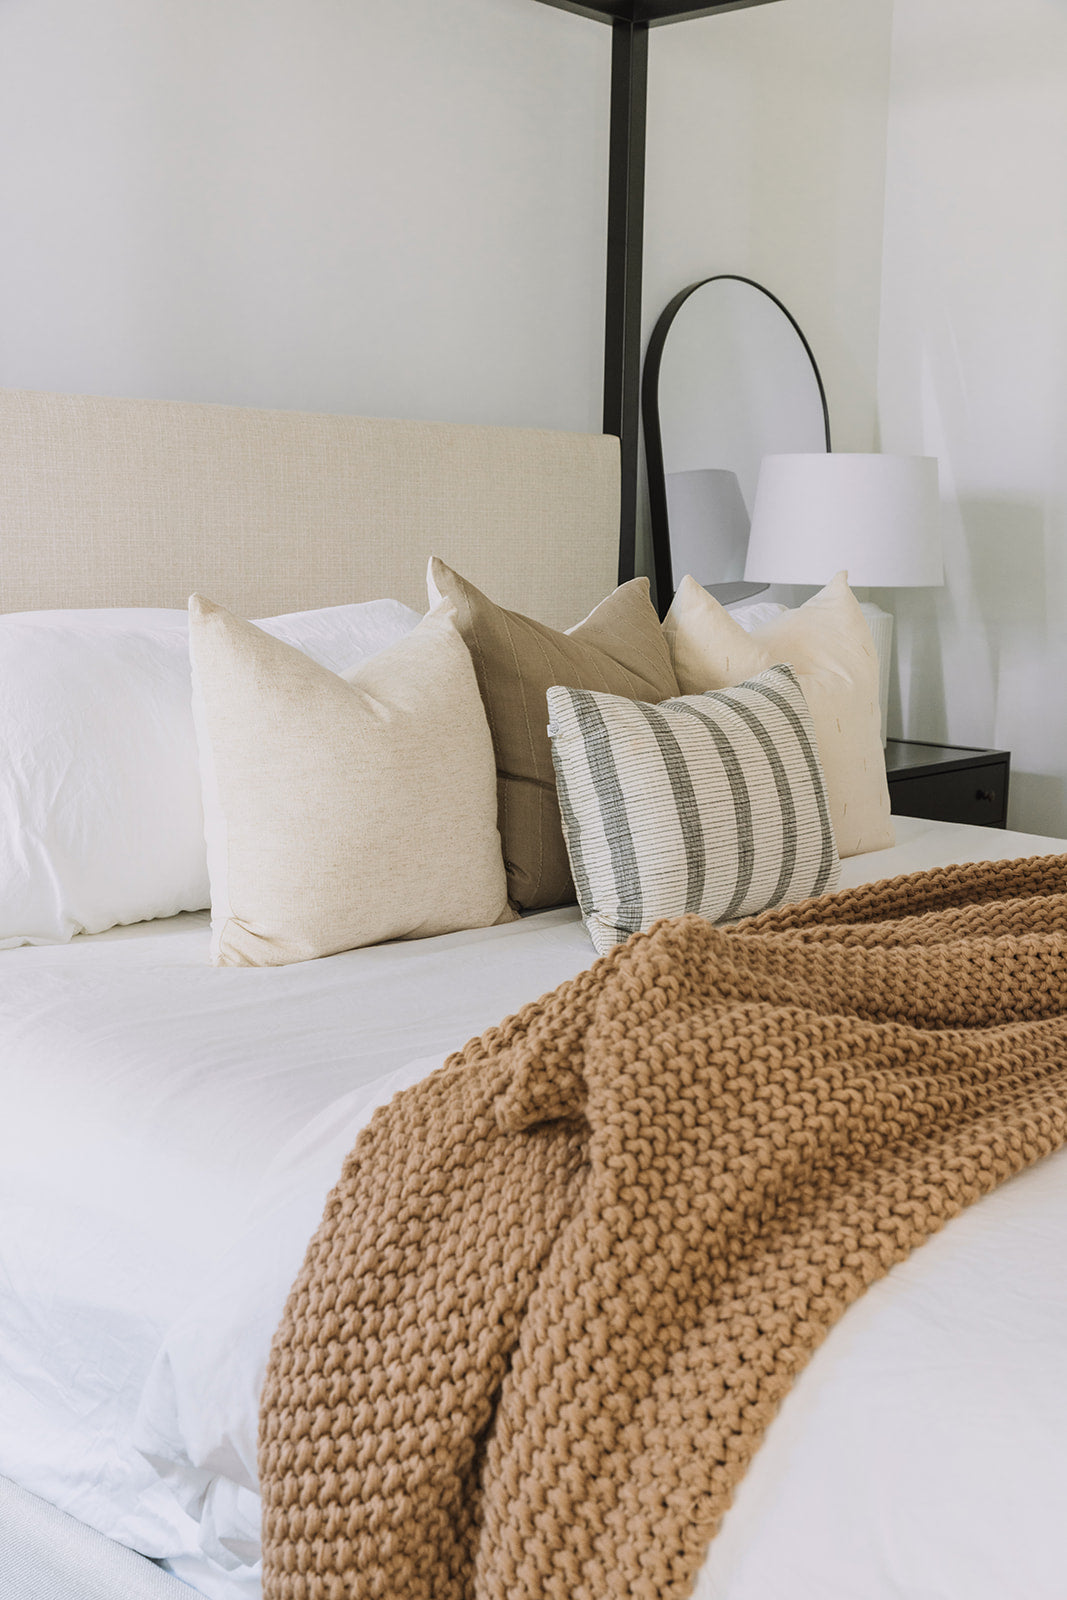 Transitioning your Bedroom for Fall